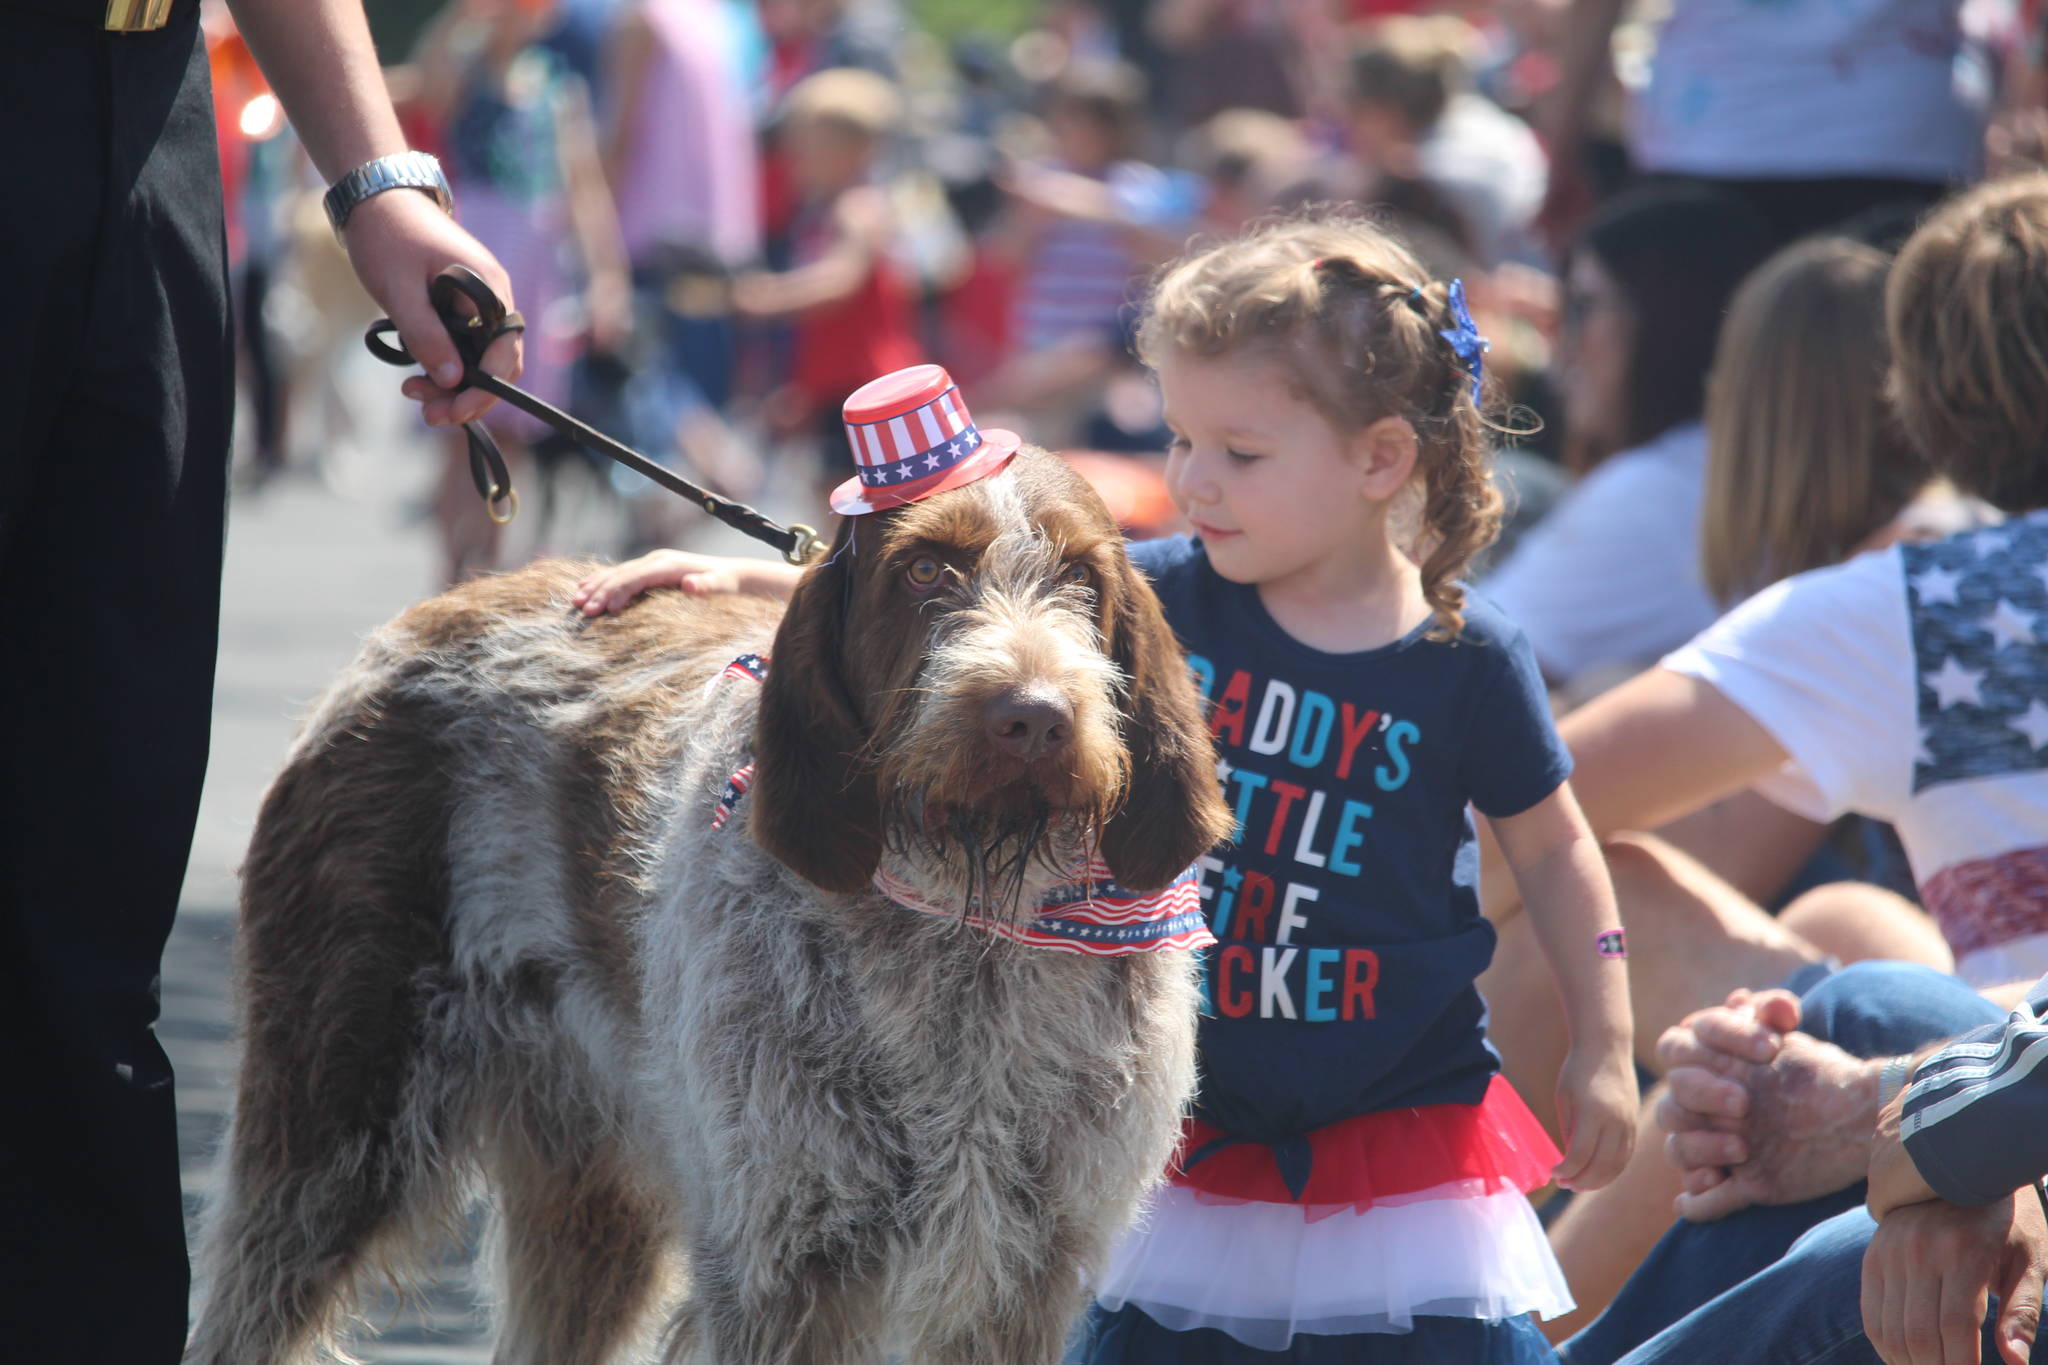 Espyn Gassett, 3, pets a dog who walked in the parade. (Photo by Karina Andrew/Whidbey News-Times)